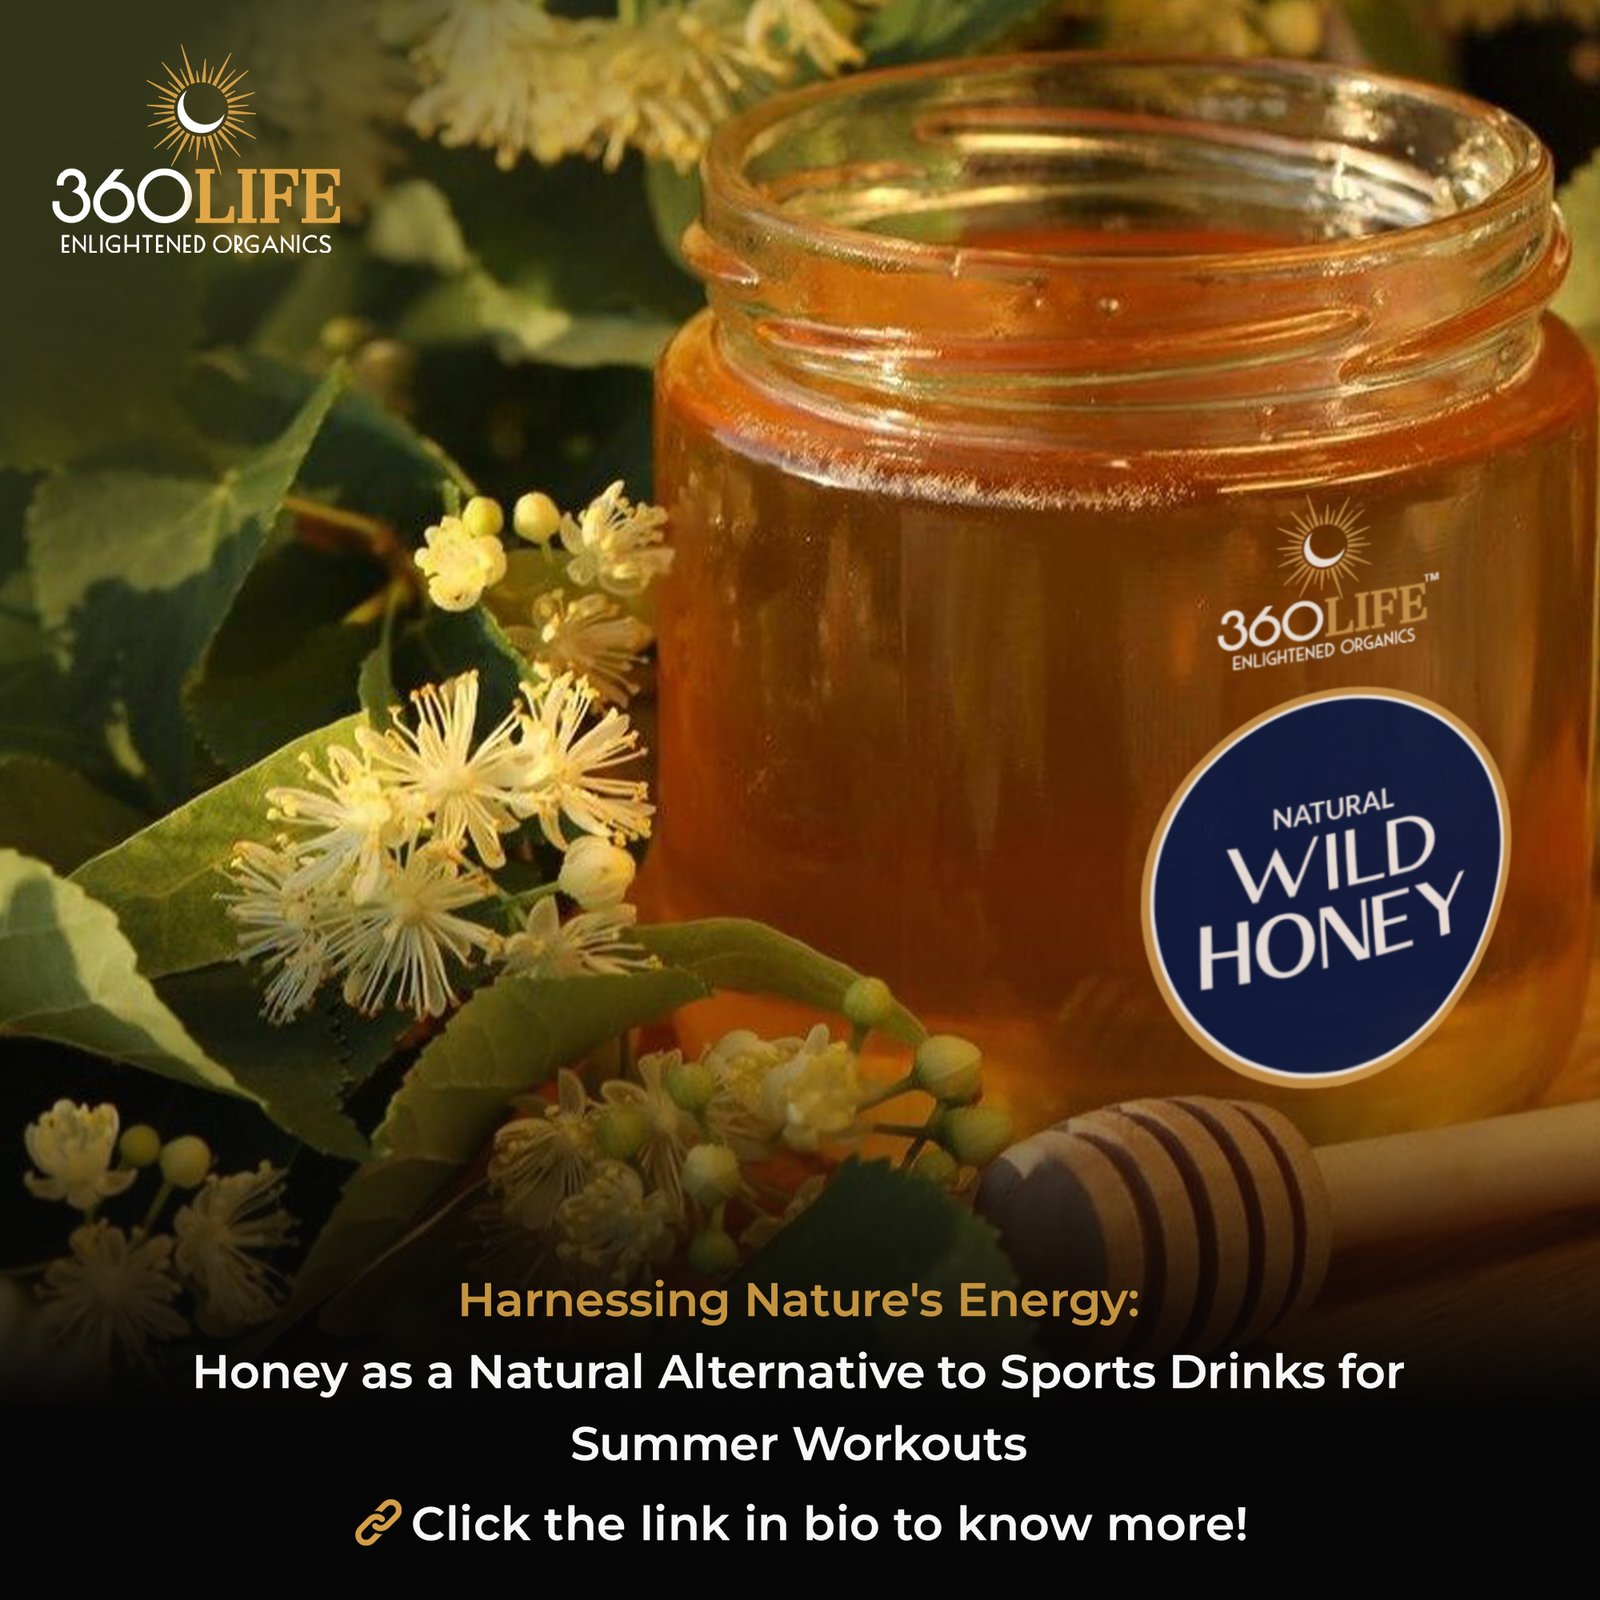 Harnessing Nature's Energy: Honey as a Natural Alternative to Sports Drinks for Summer Workouts